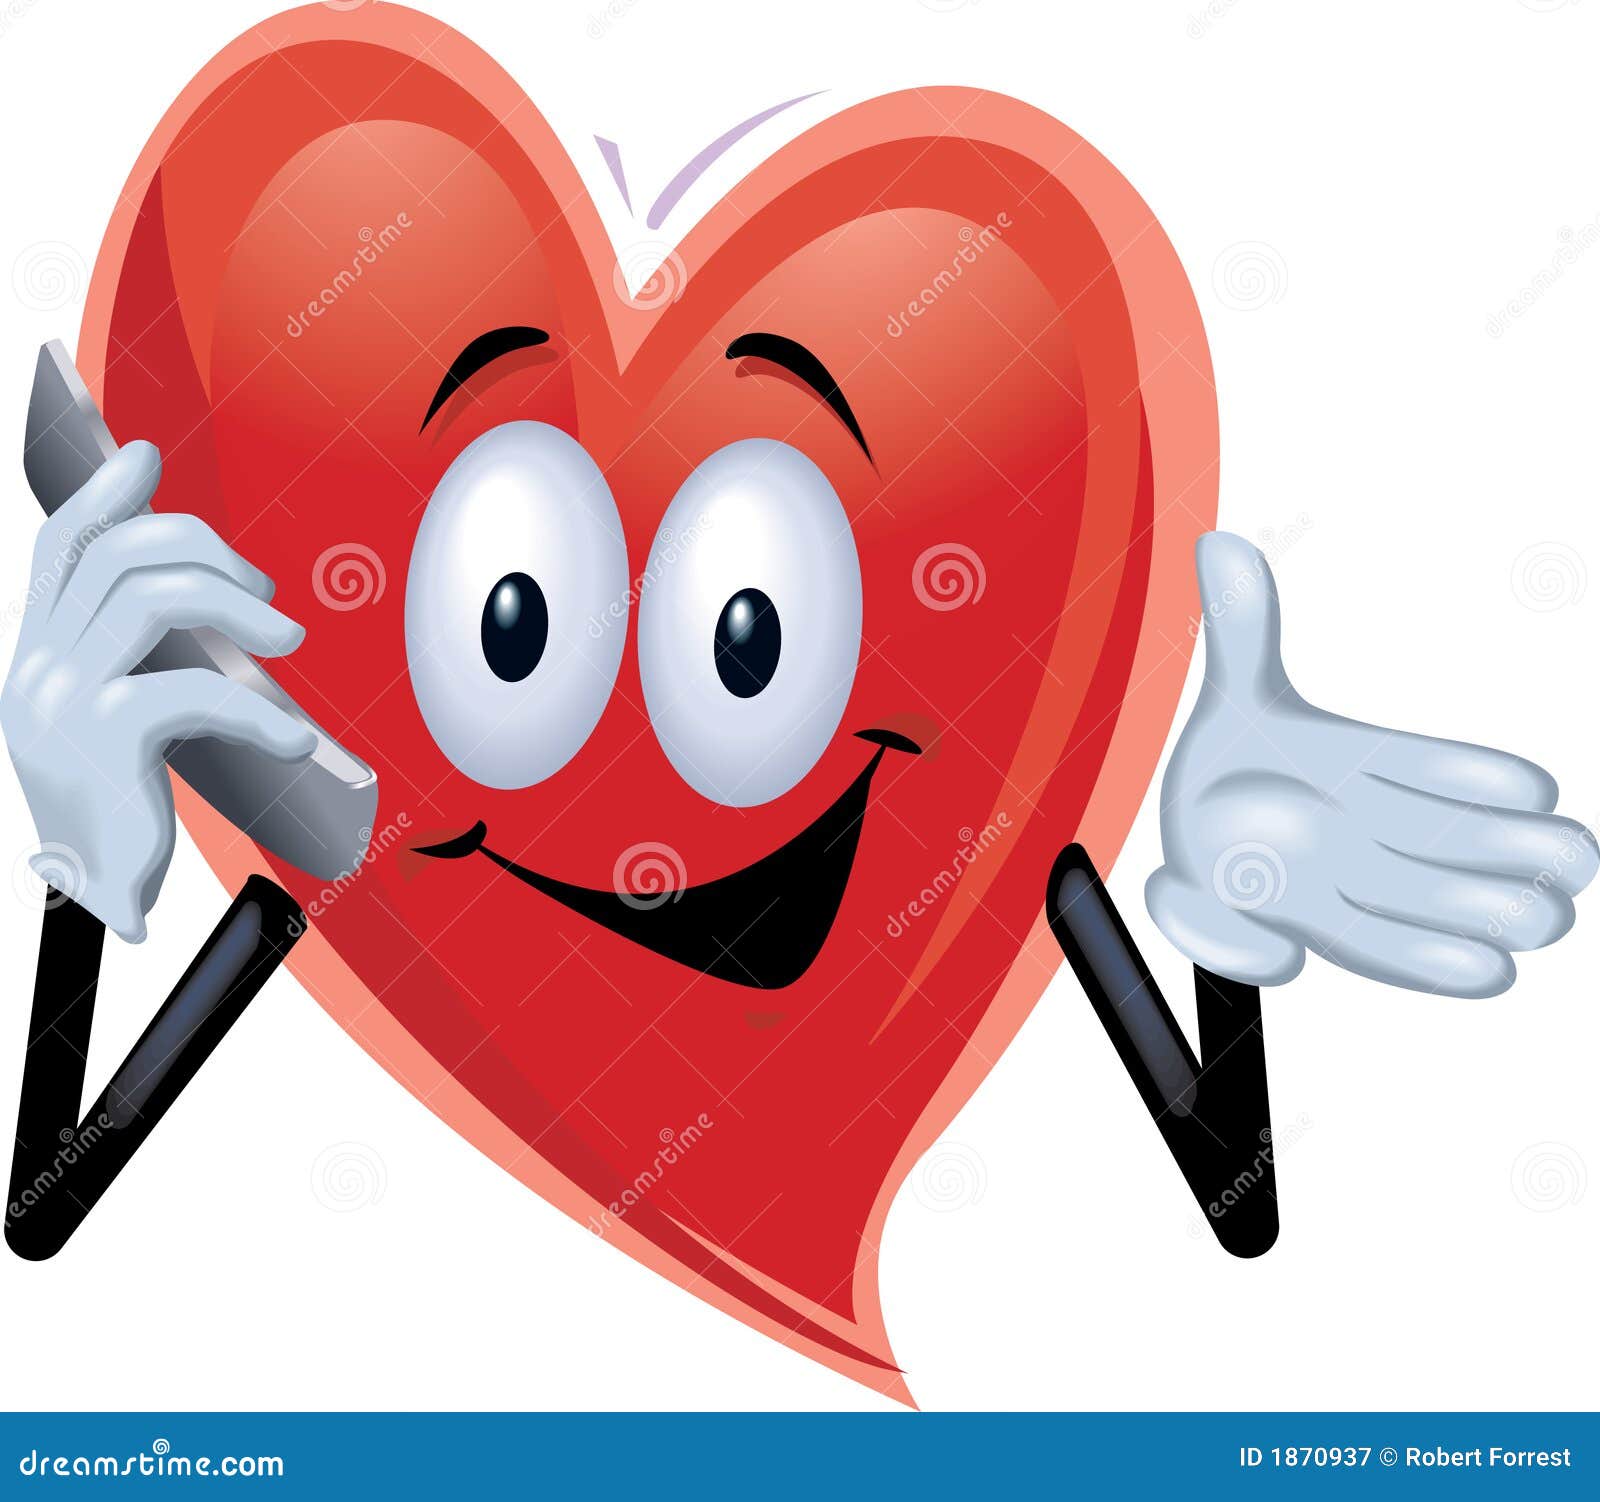 clipart man with heart - photo #11